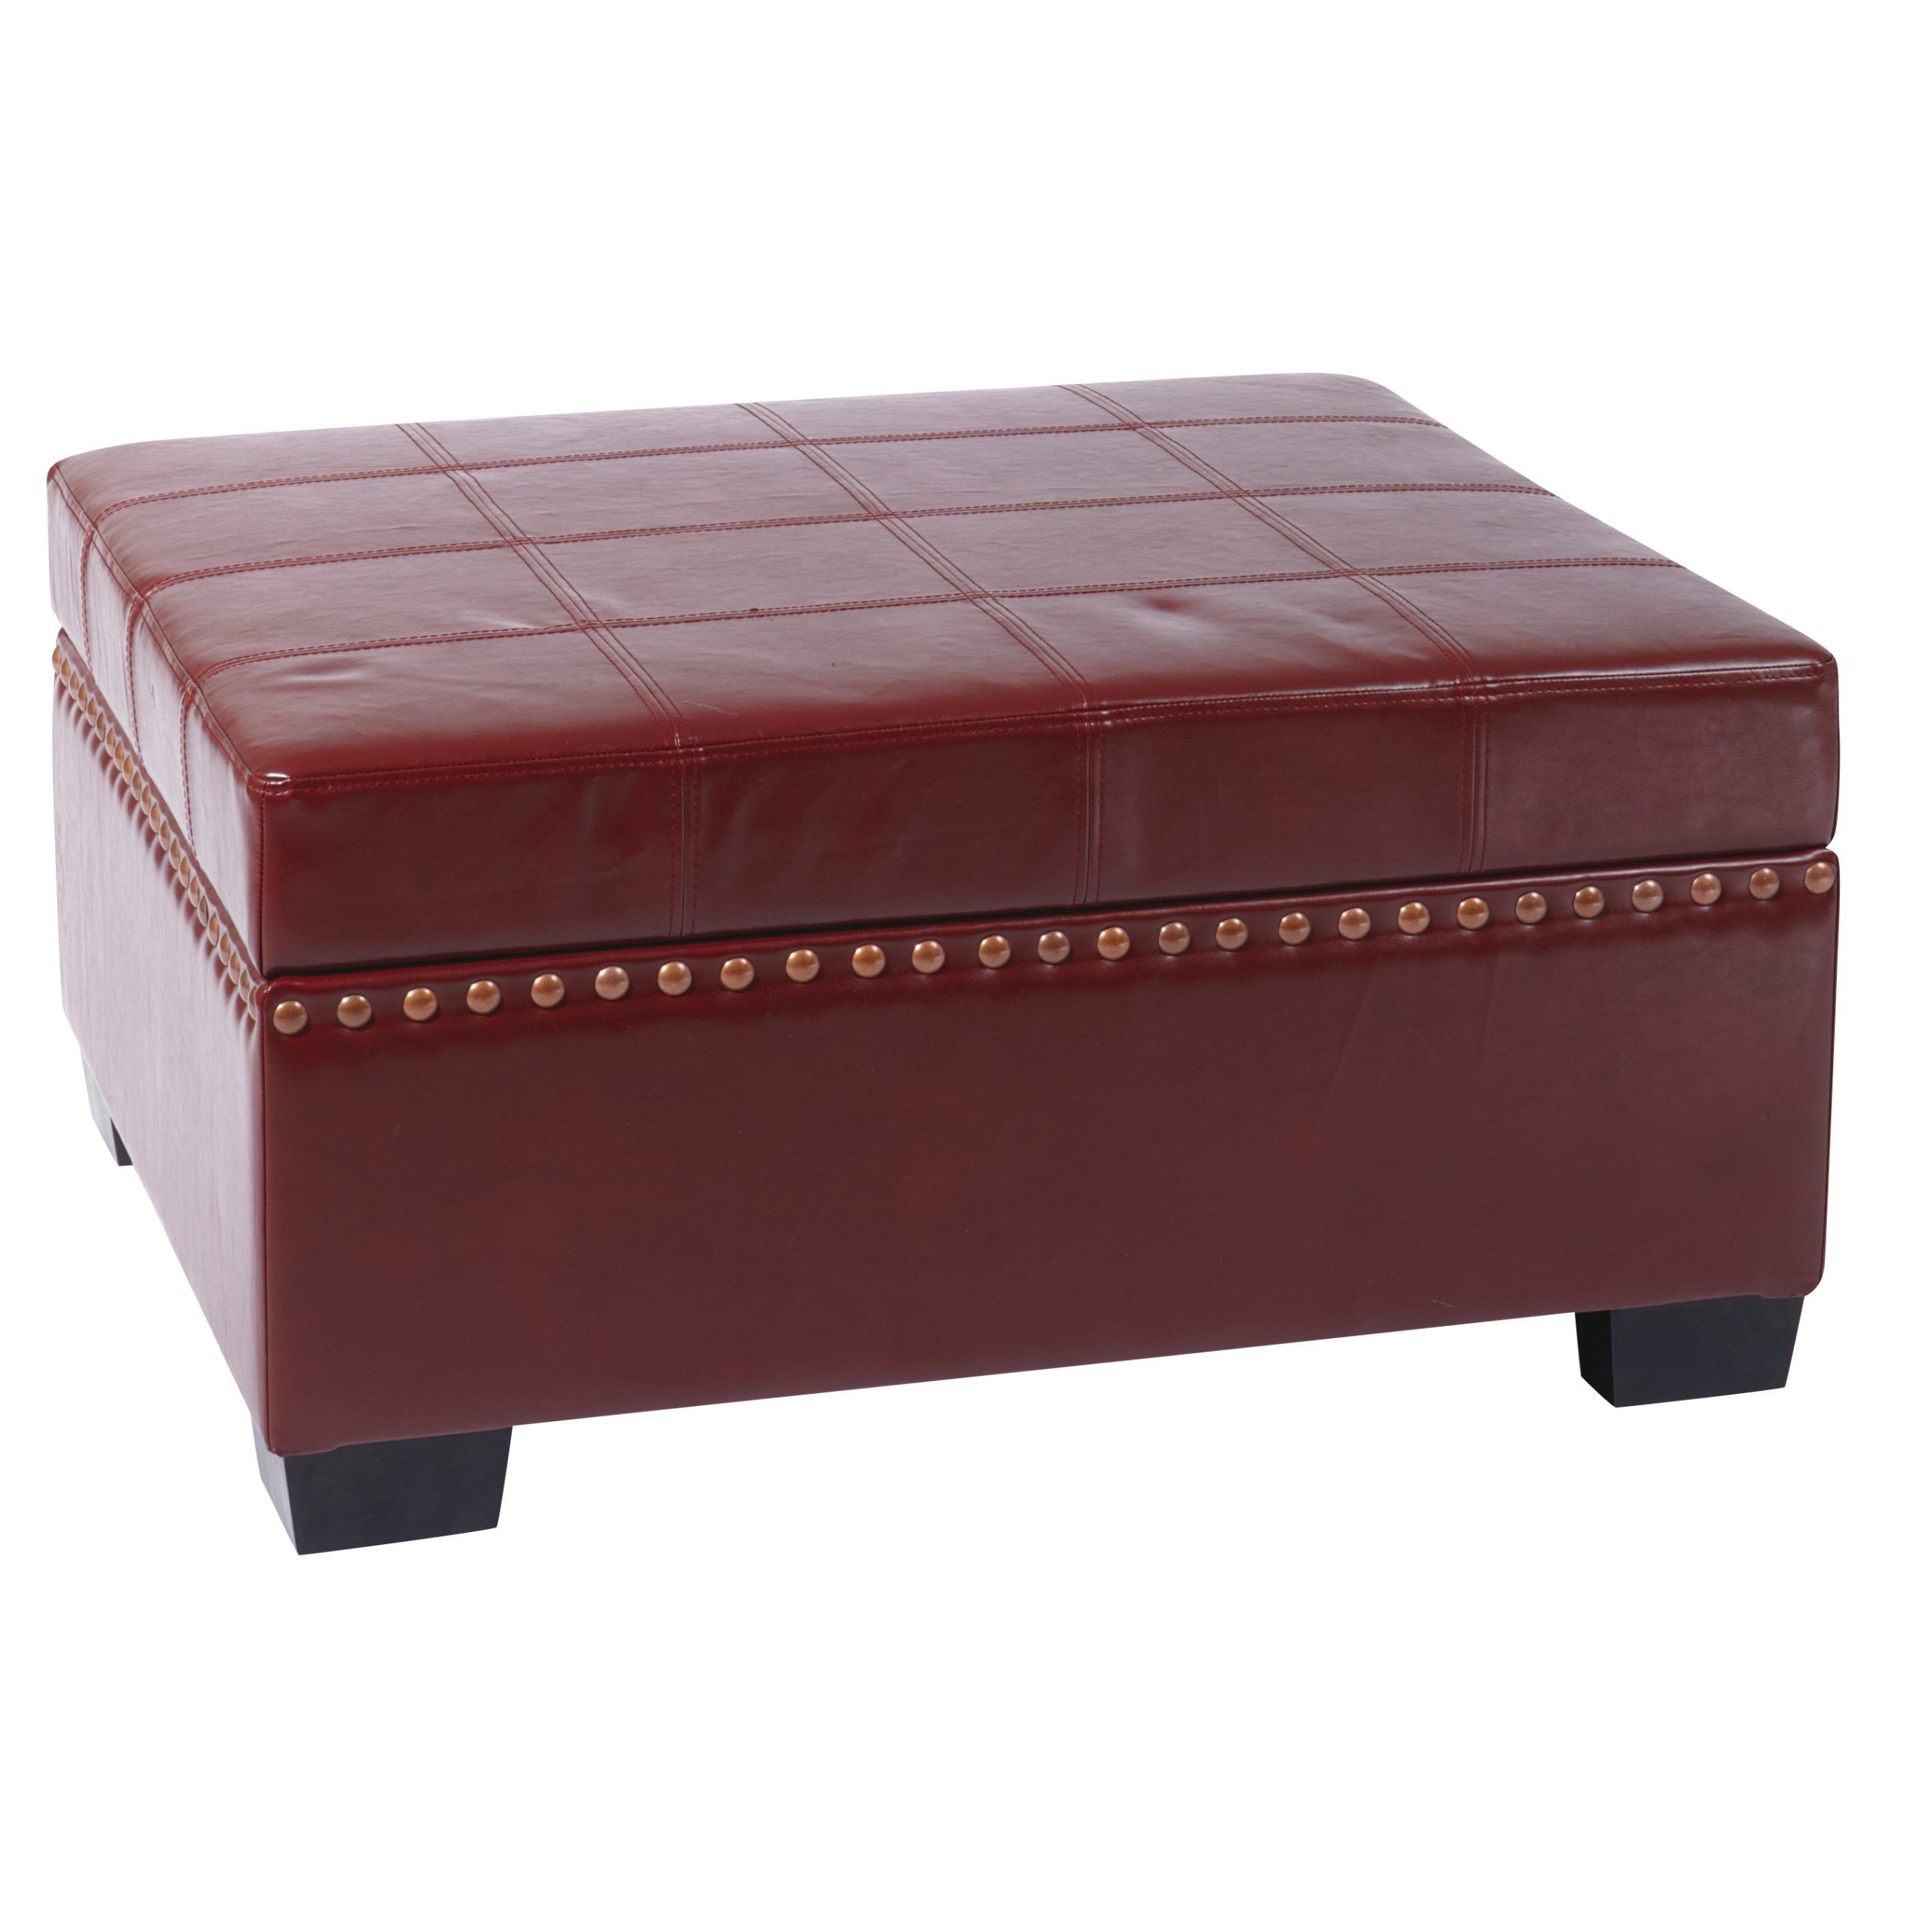 Nailhead Detour Storage Ottoman With Tray, Multiple Colors – Walmart With Multi Color Fabric Storage Ottomans (View 3 of 20)